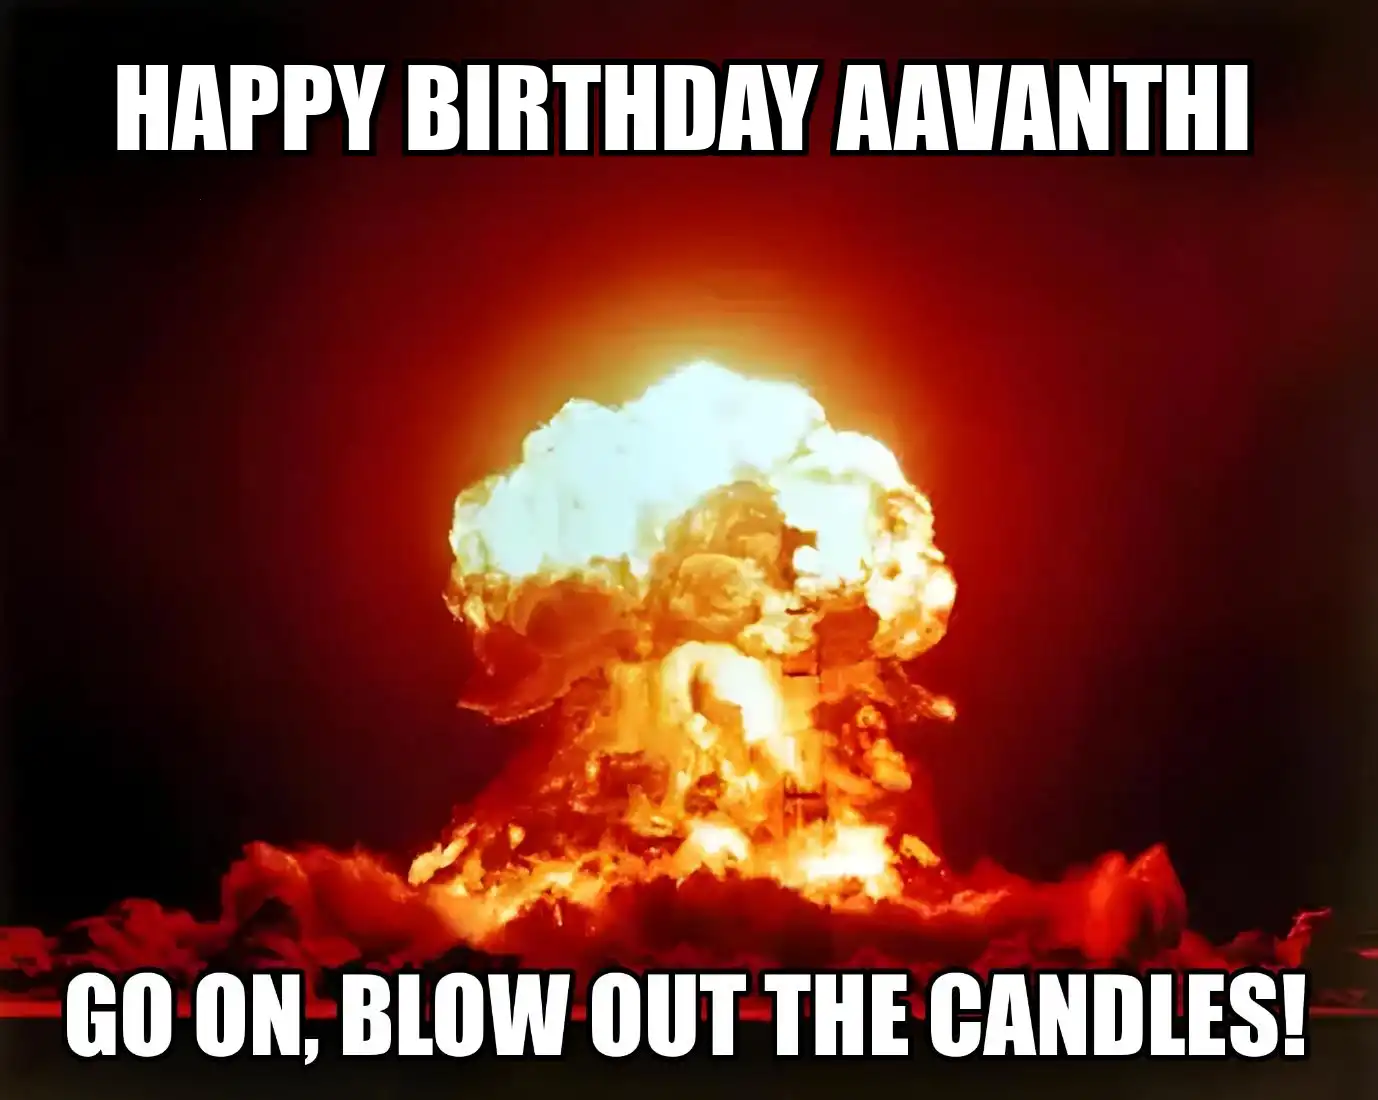 Happy Birthday Aavanthi Go On Blow Out The Candles Meme